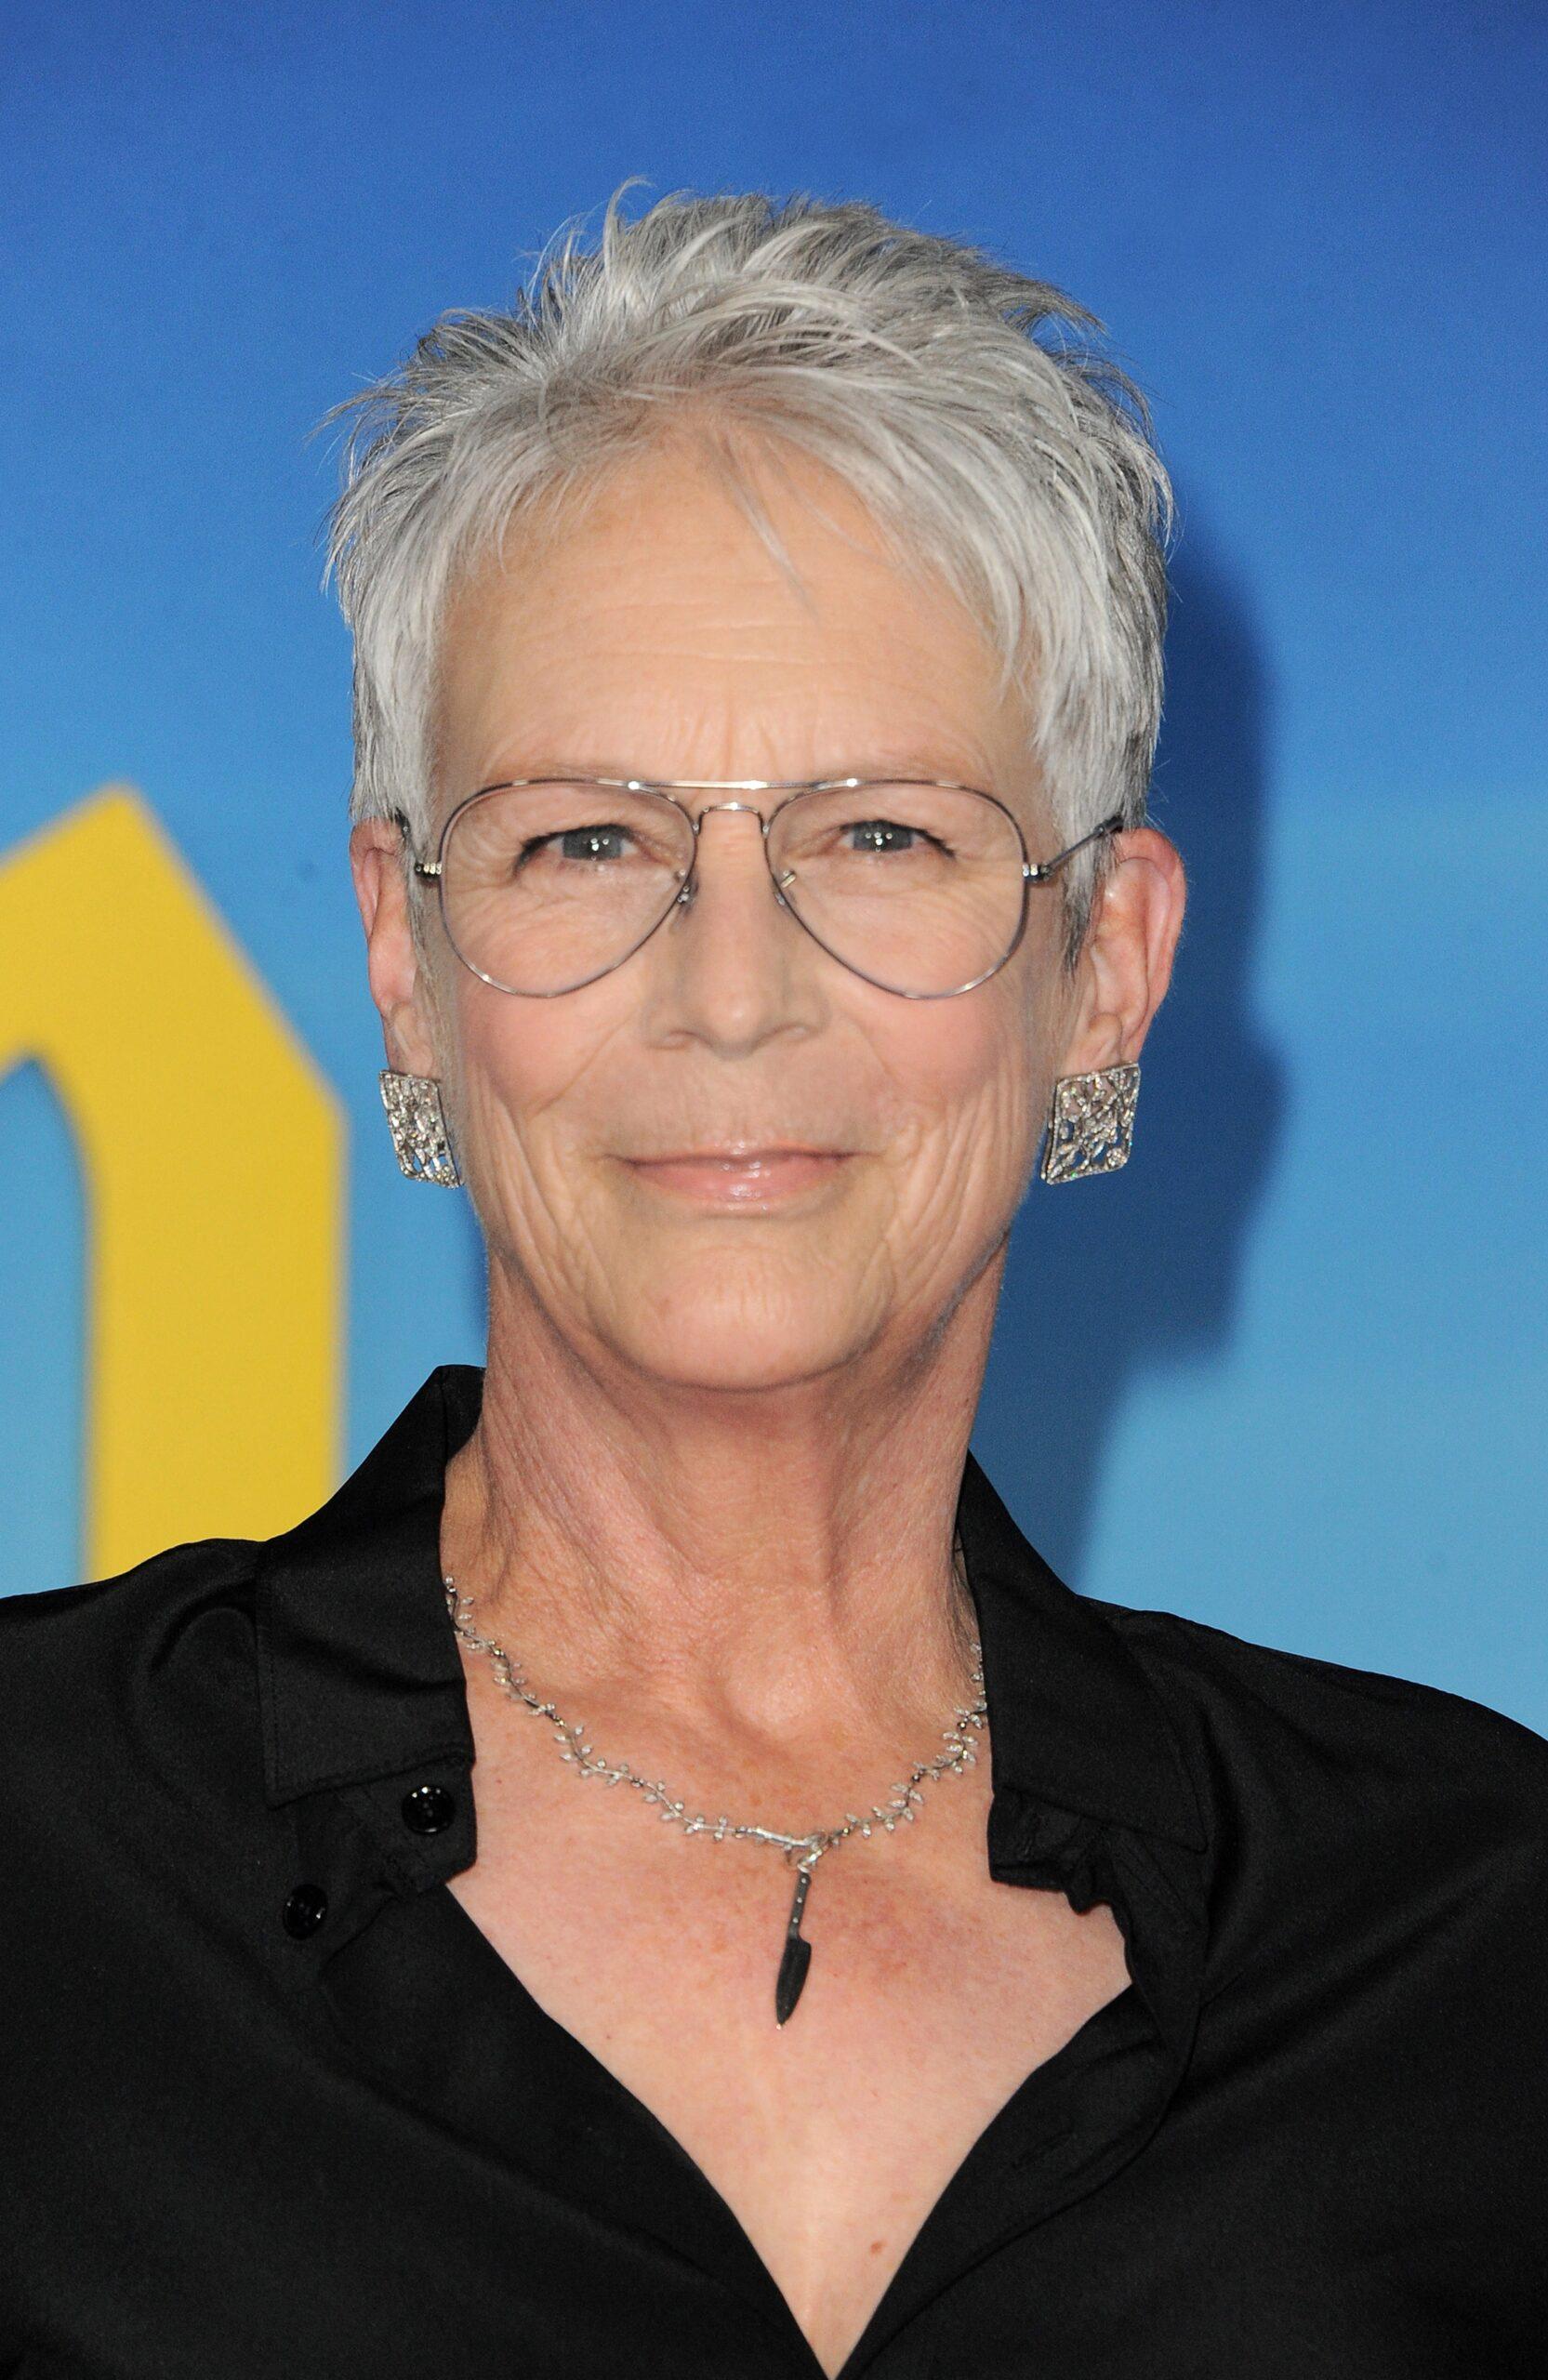 Jamie Lee Curtis at Los Angeles premiere of Netflix's 'Glass Onion: A Knives Out Mystery'